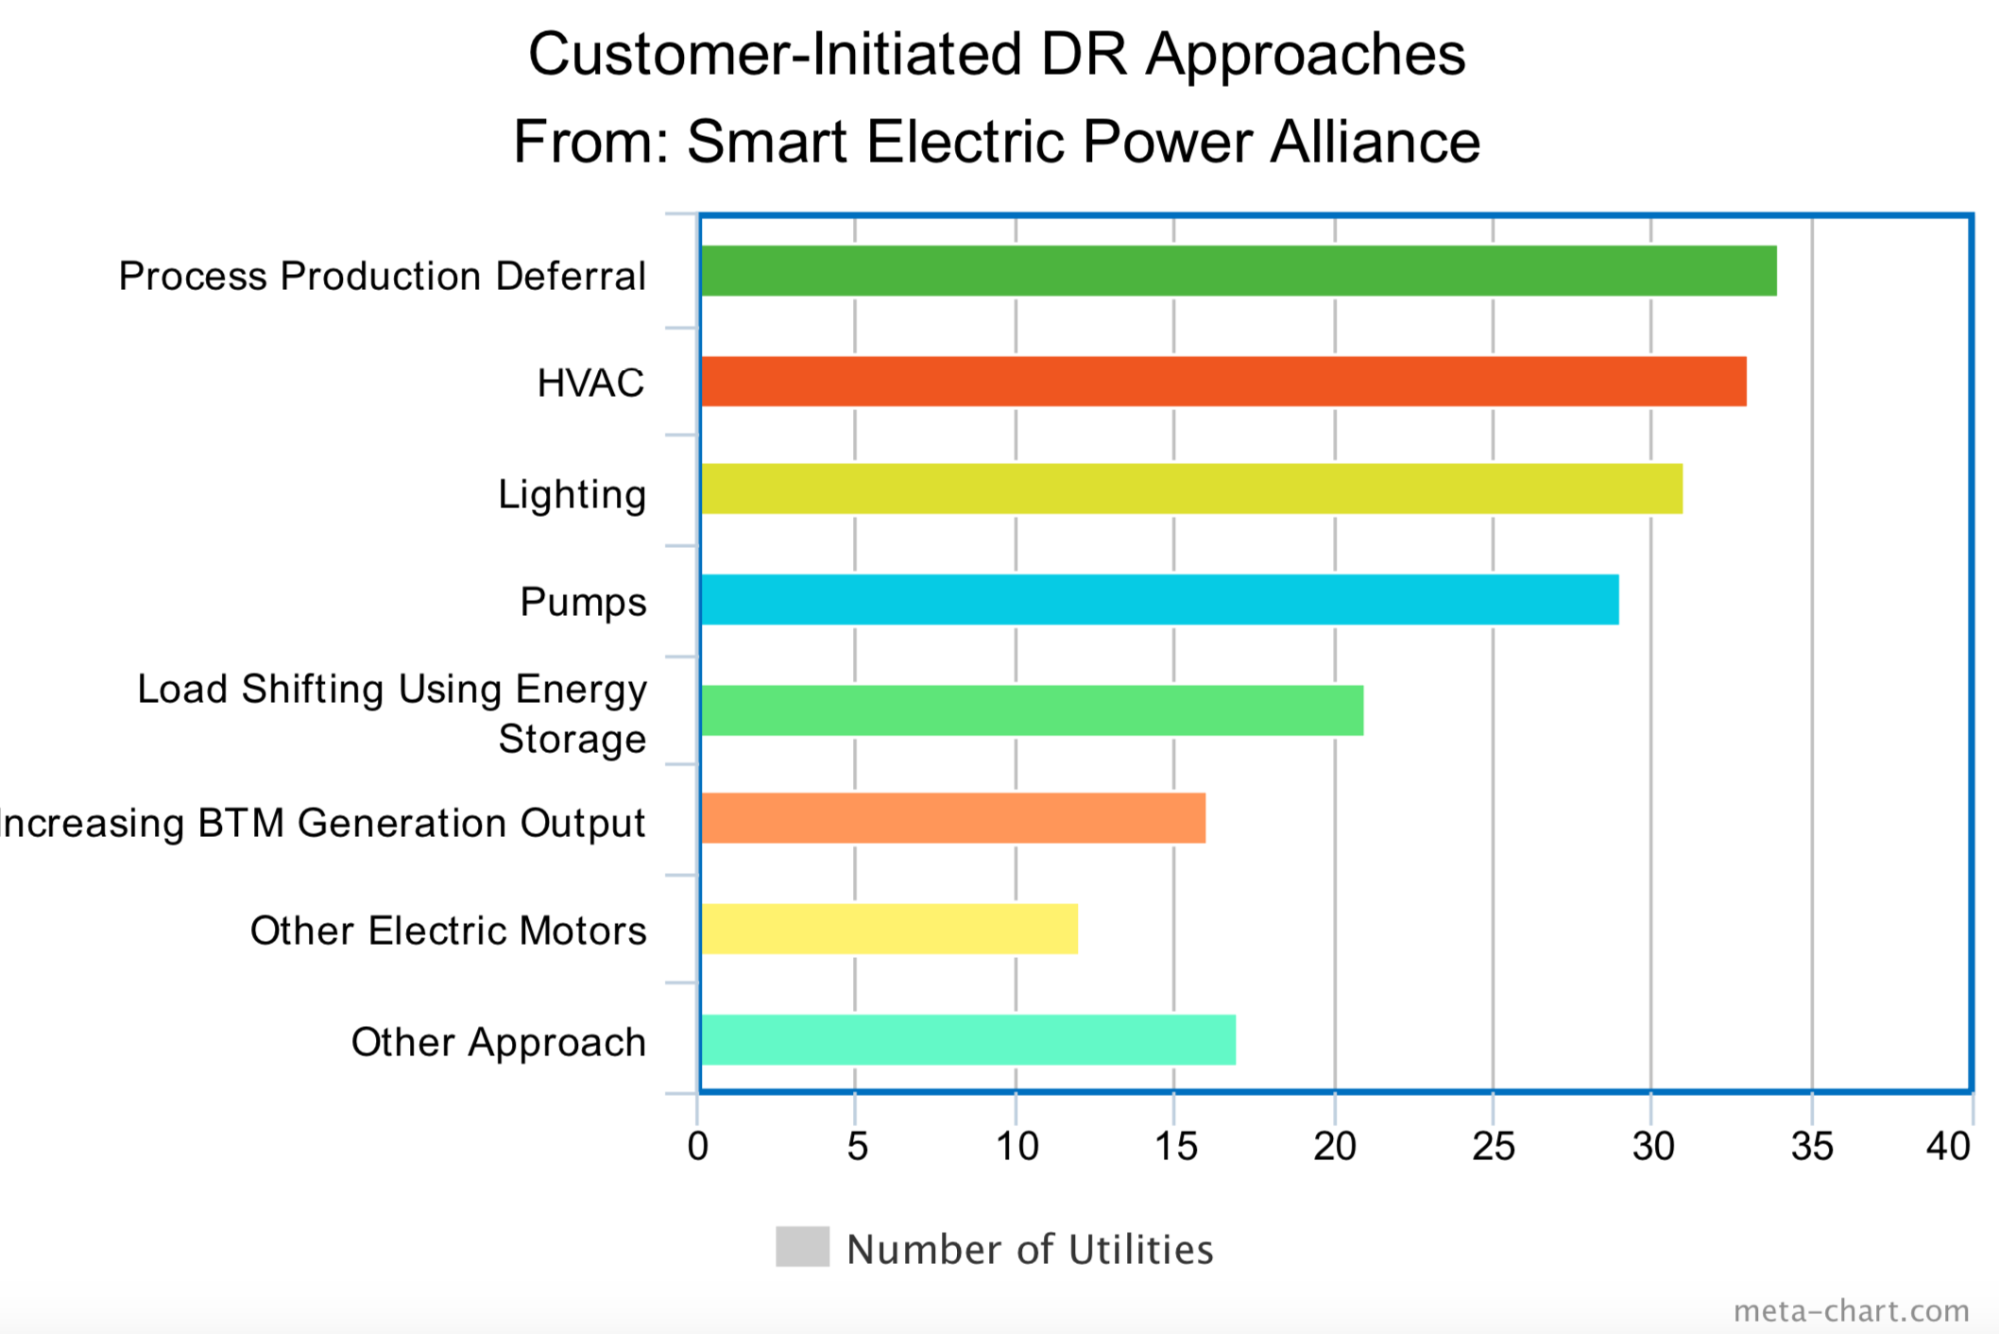 Customer-initiated DR approaches from Smart Electric Power Alliance